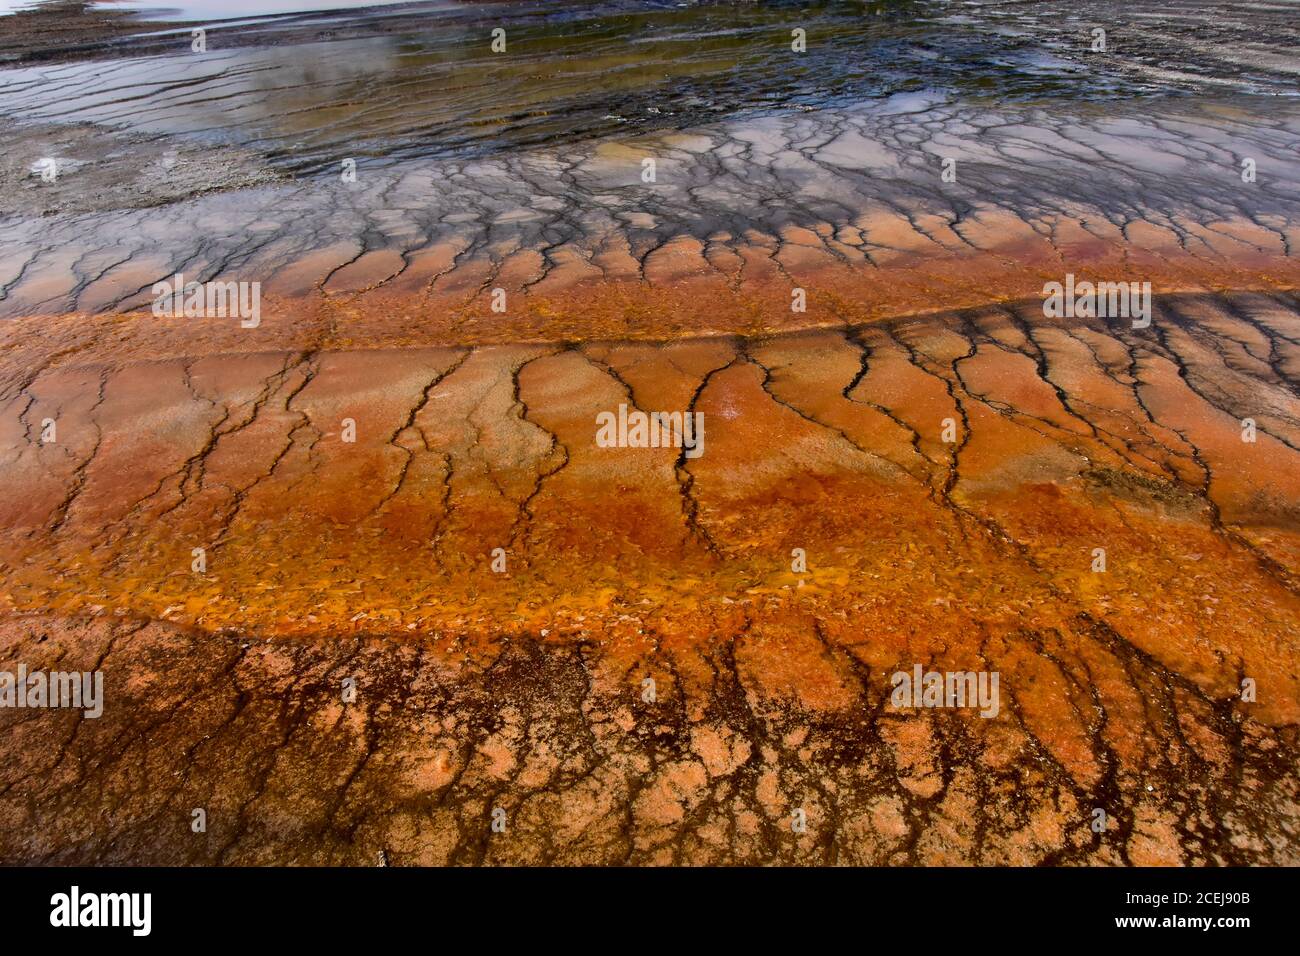 Strange and Colorful bacteria mats at Midway Geyser Basin, Yellowstone National Park. Midway Geyser basin also has many beautiful pools, and springs. Stock Photo